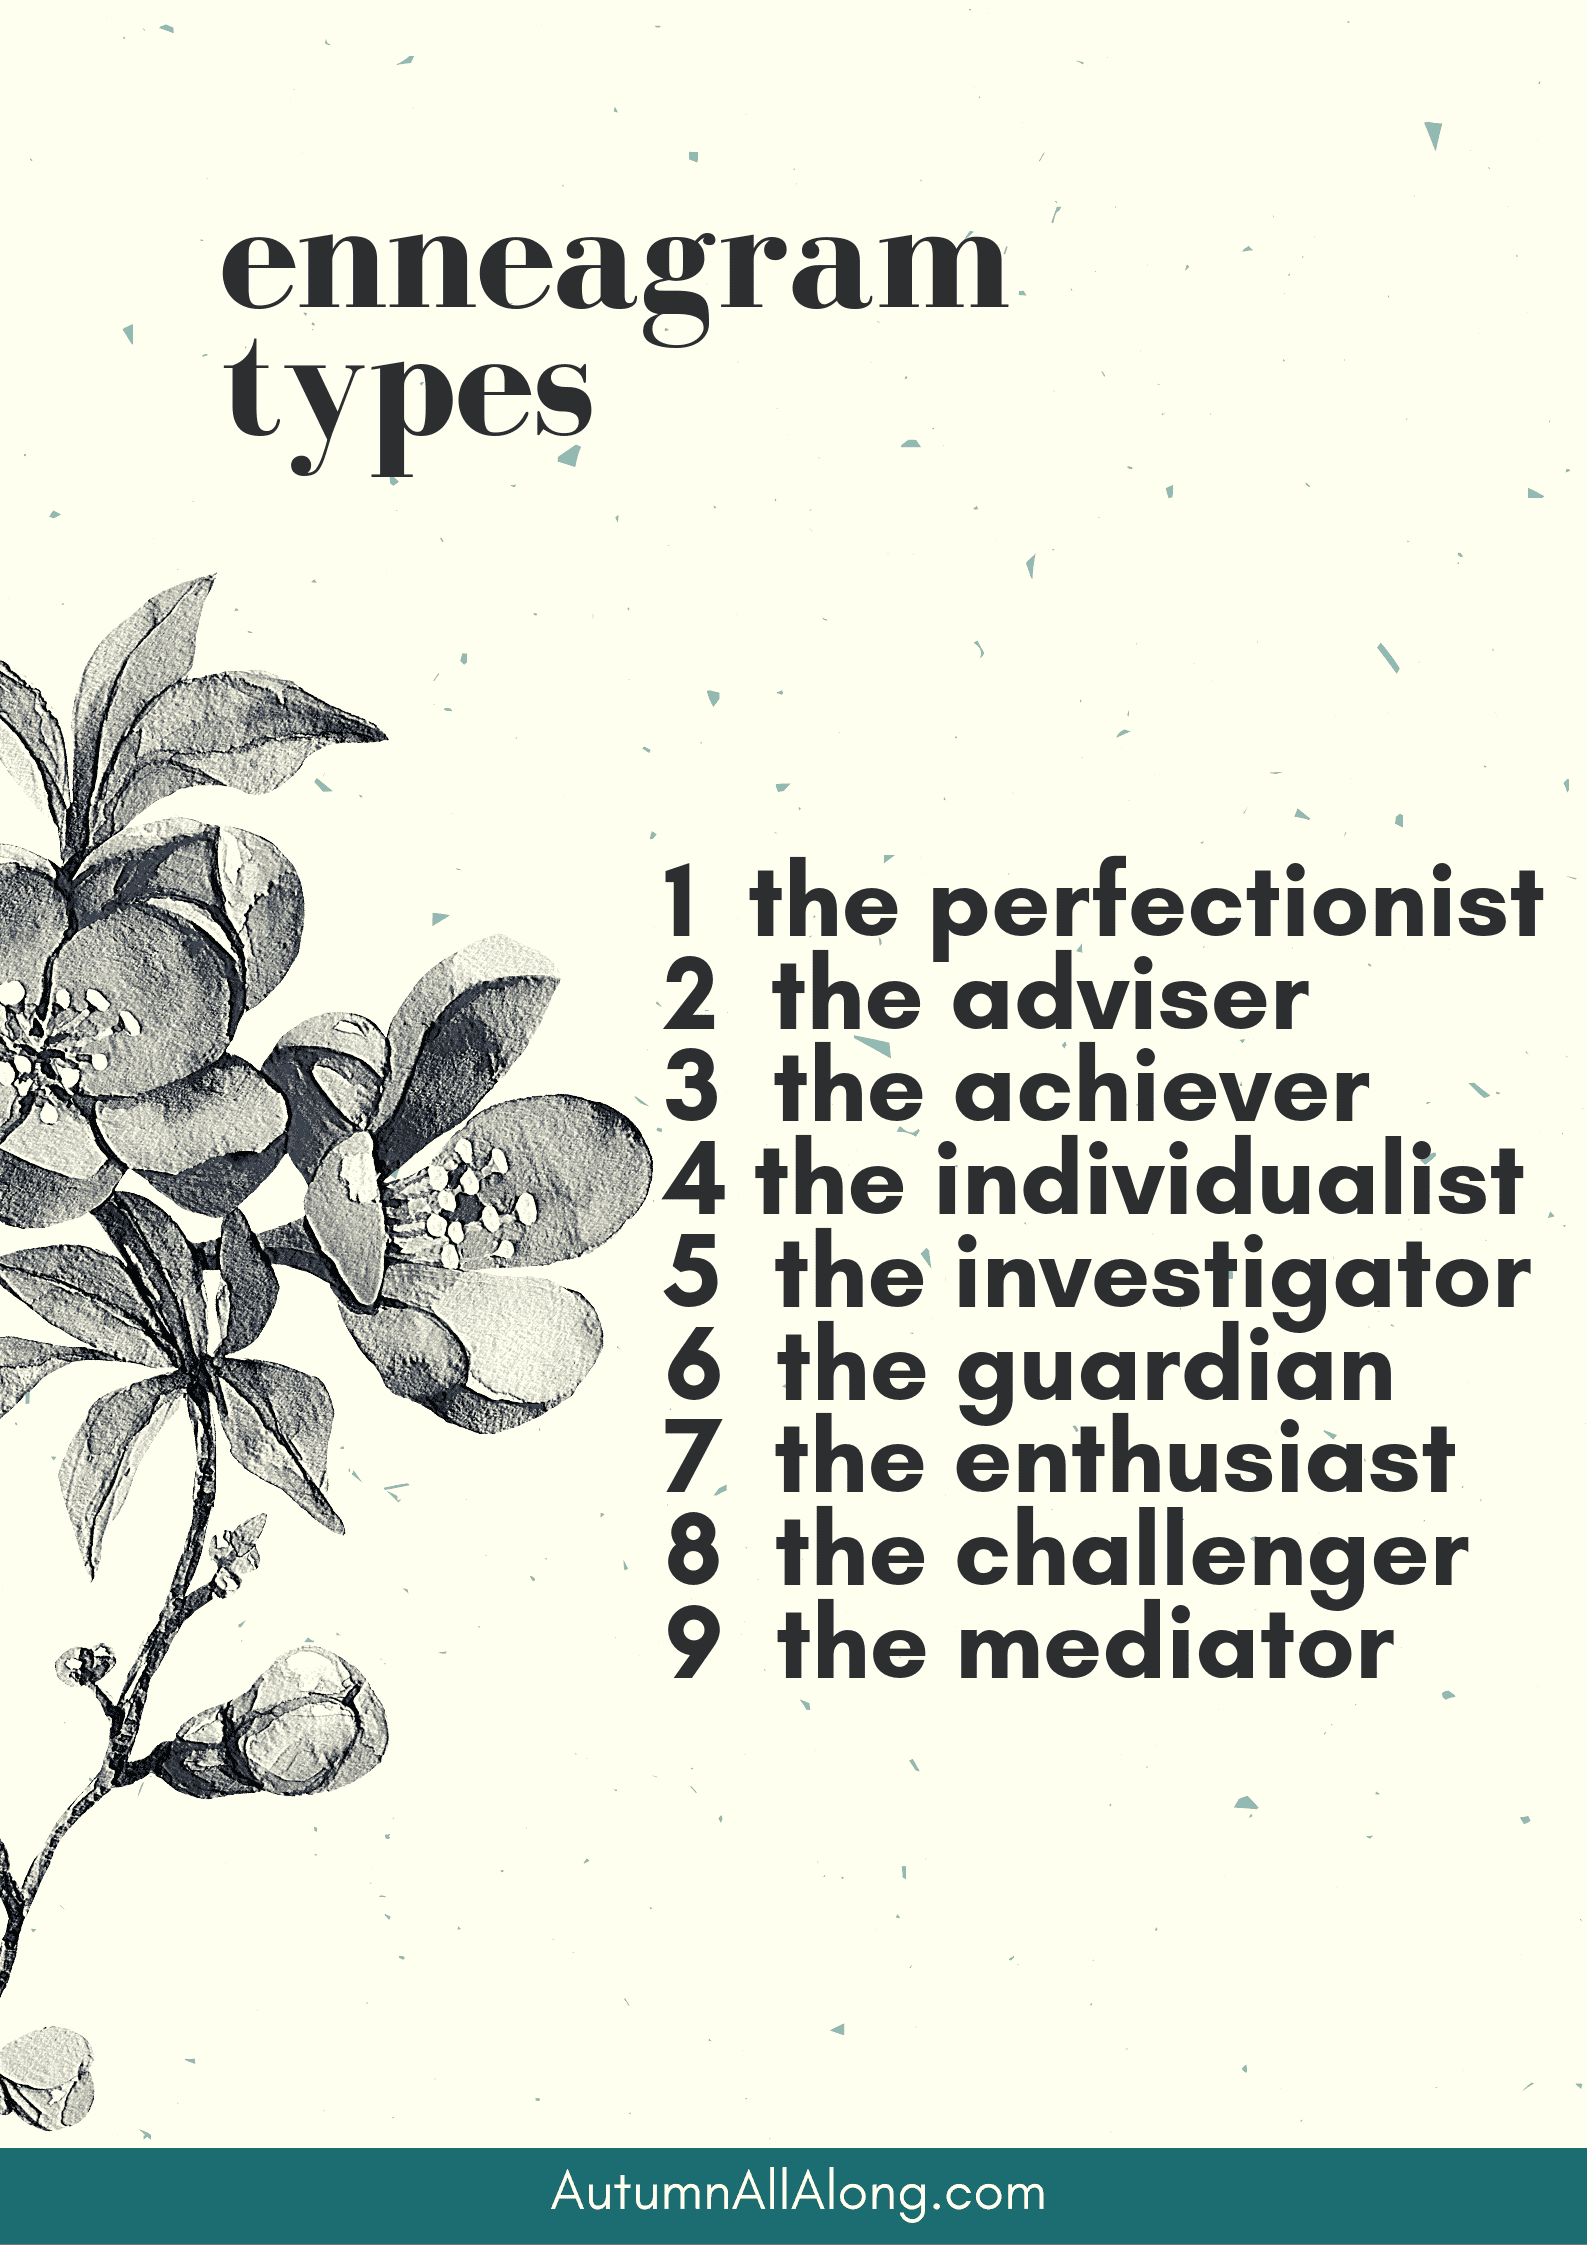 There are 9 different enneagram types, but each person only has one main type. | via Autumn All Along